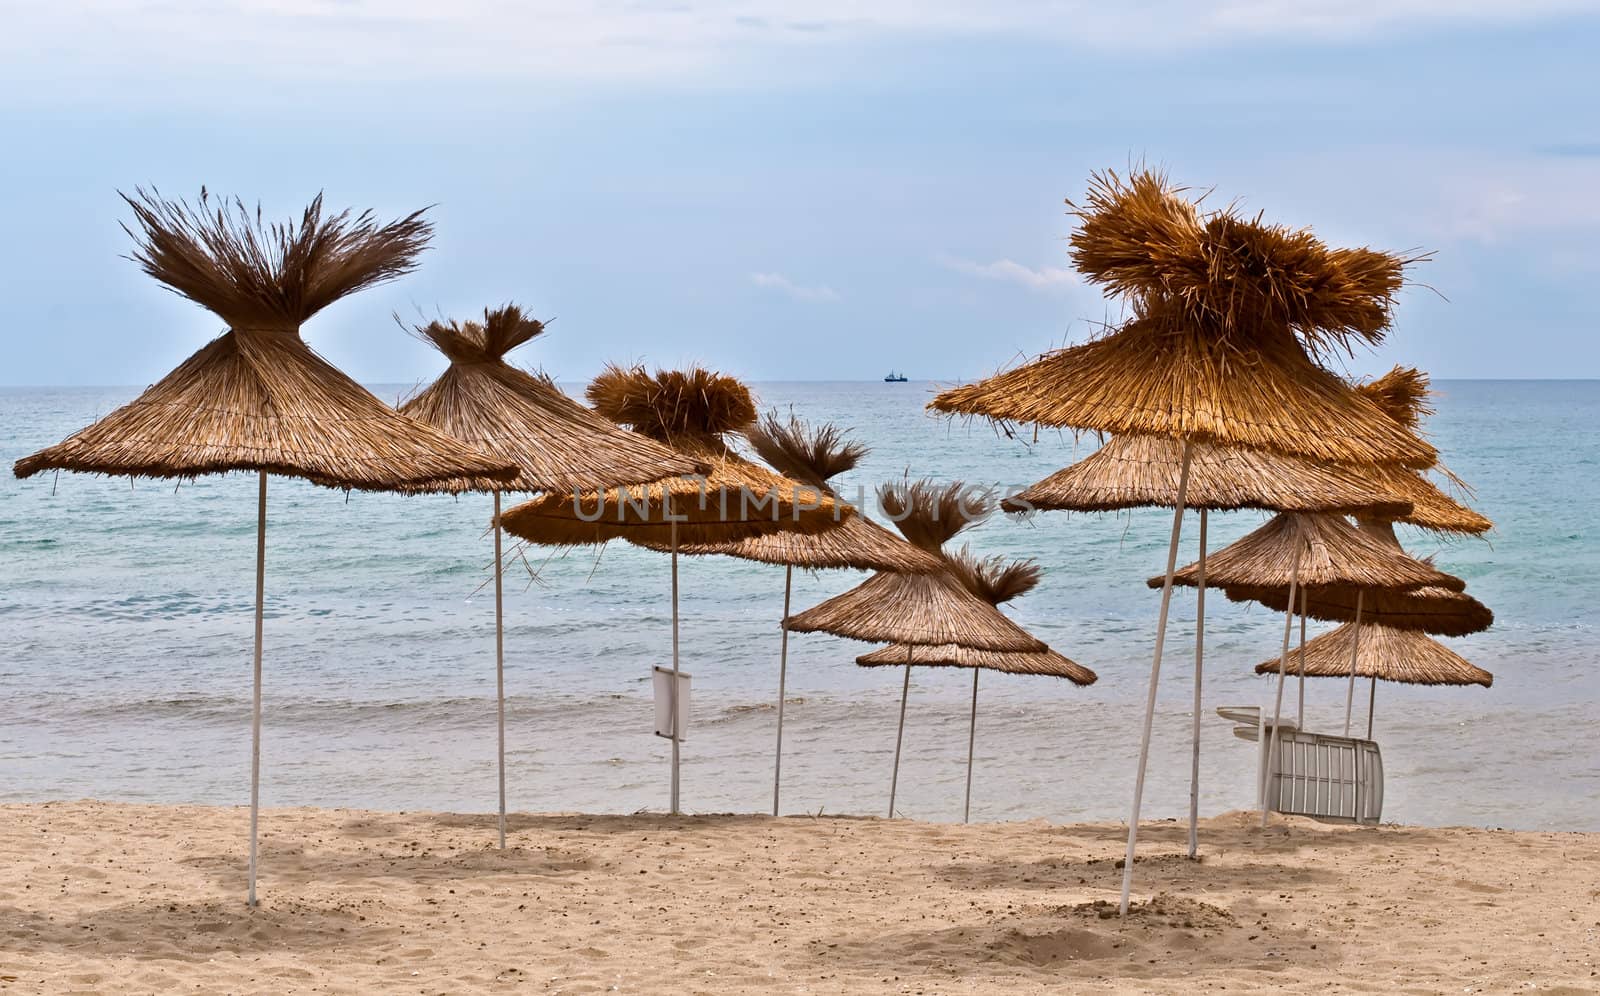 View of the beach with  straw umbrellas.